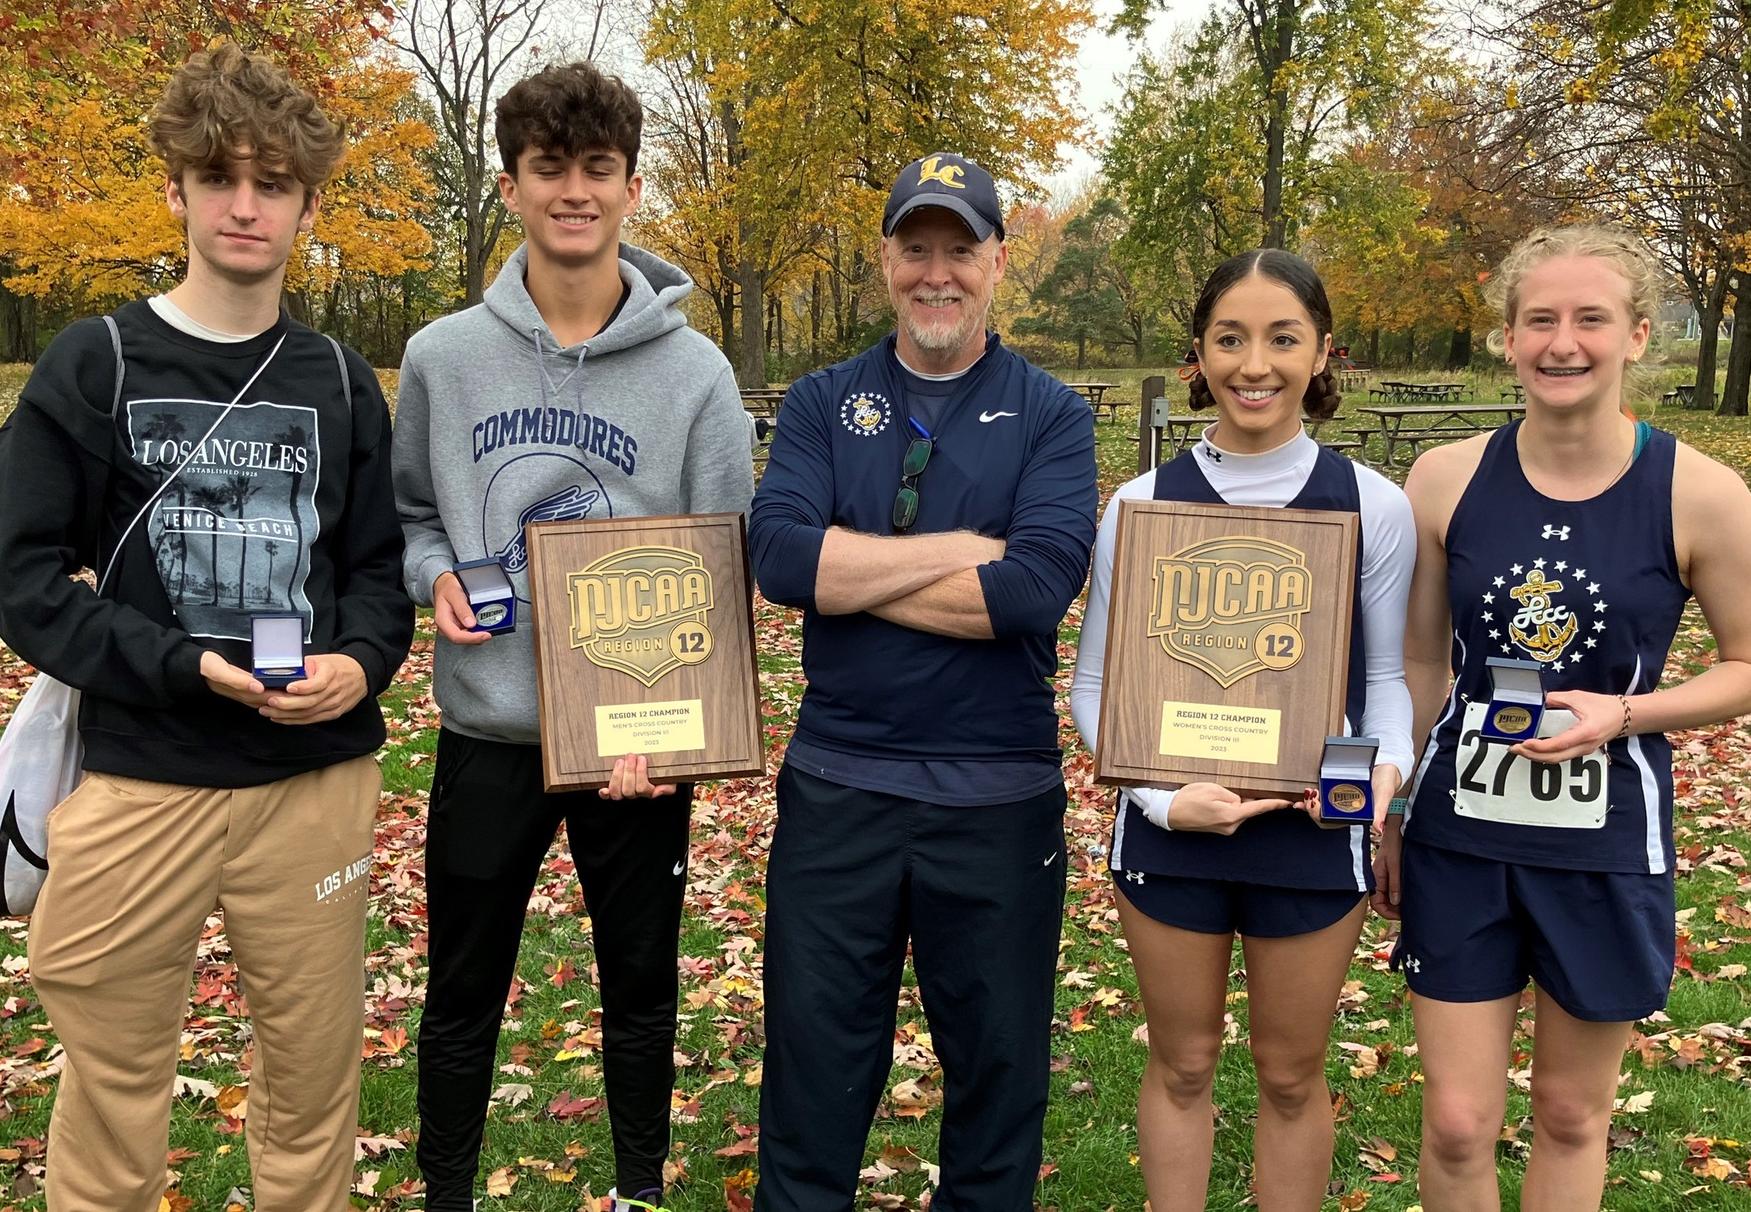 REGION CHAMPS AGAIN!  LCCC Long Distance Runners Sweep Men’s and Women’s NJCAA Region 12 Championship